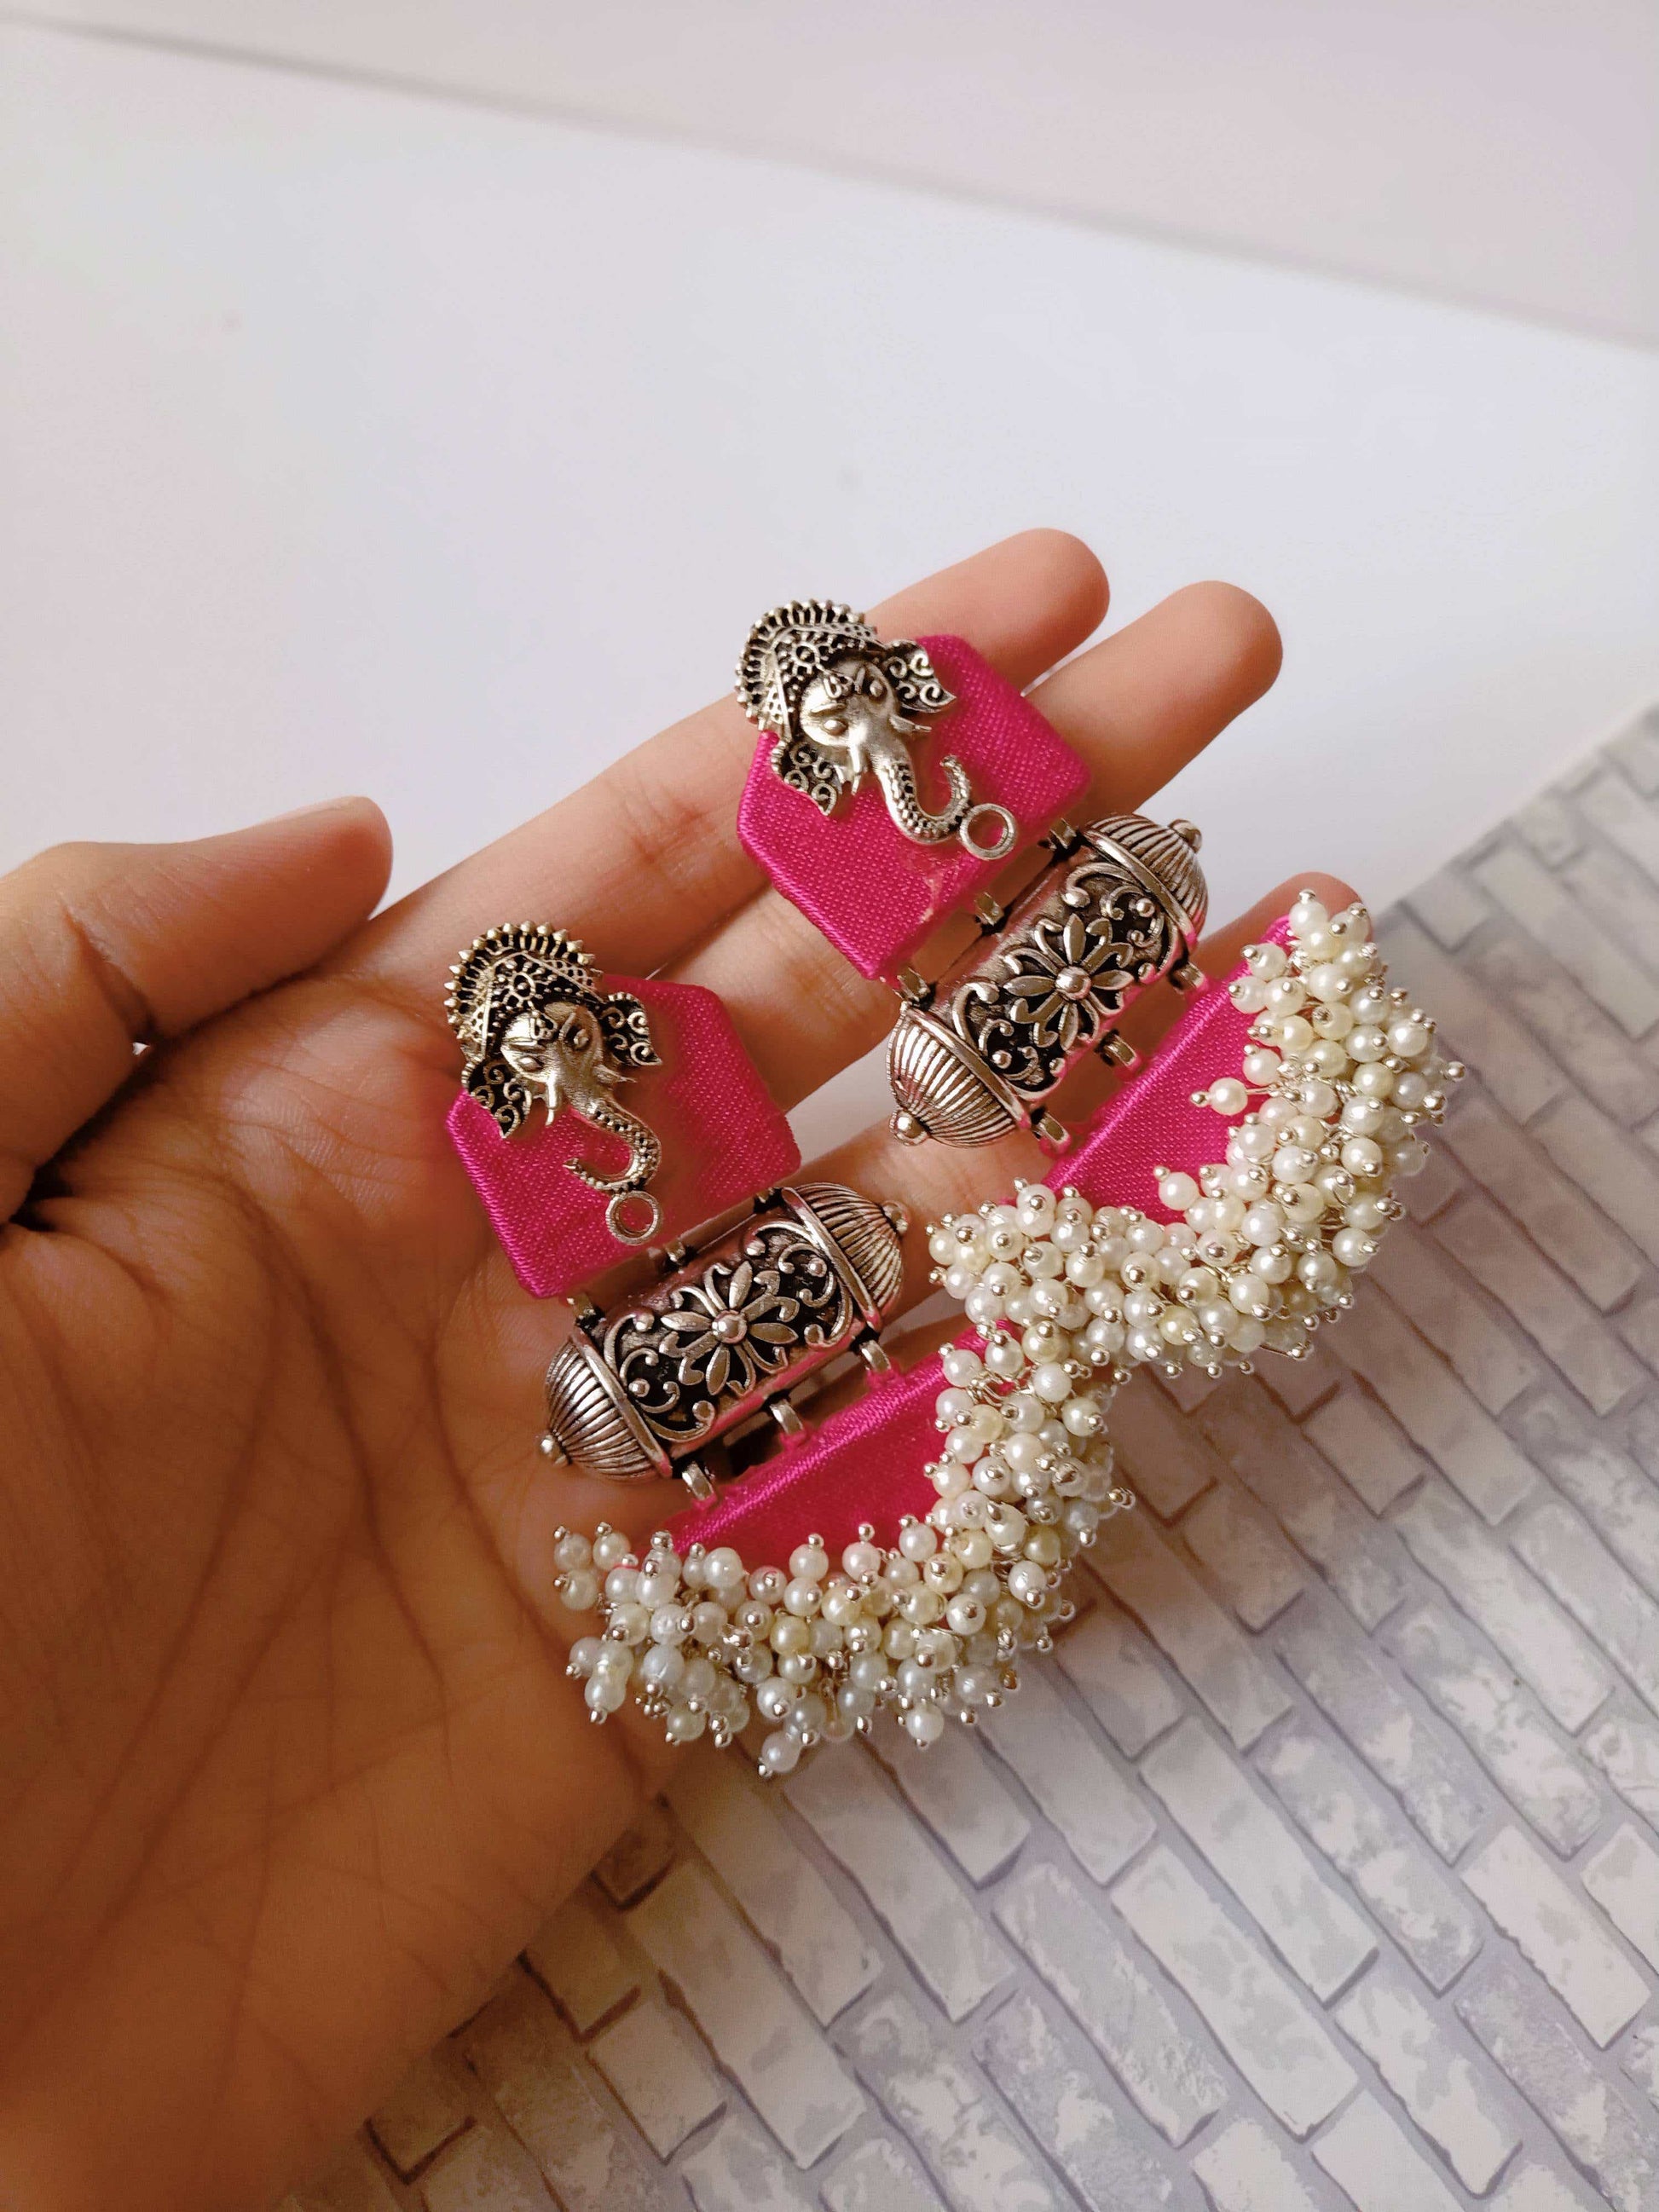 Palm holding pink earrings with ganpati face charm and silver white beads at the bottom on white grey backdrop